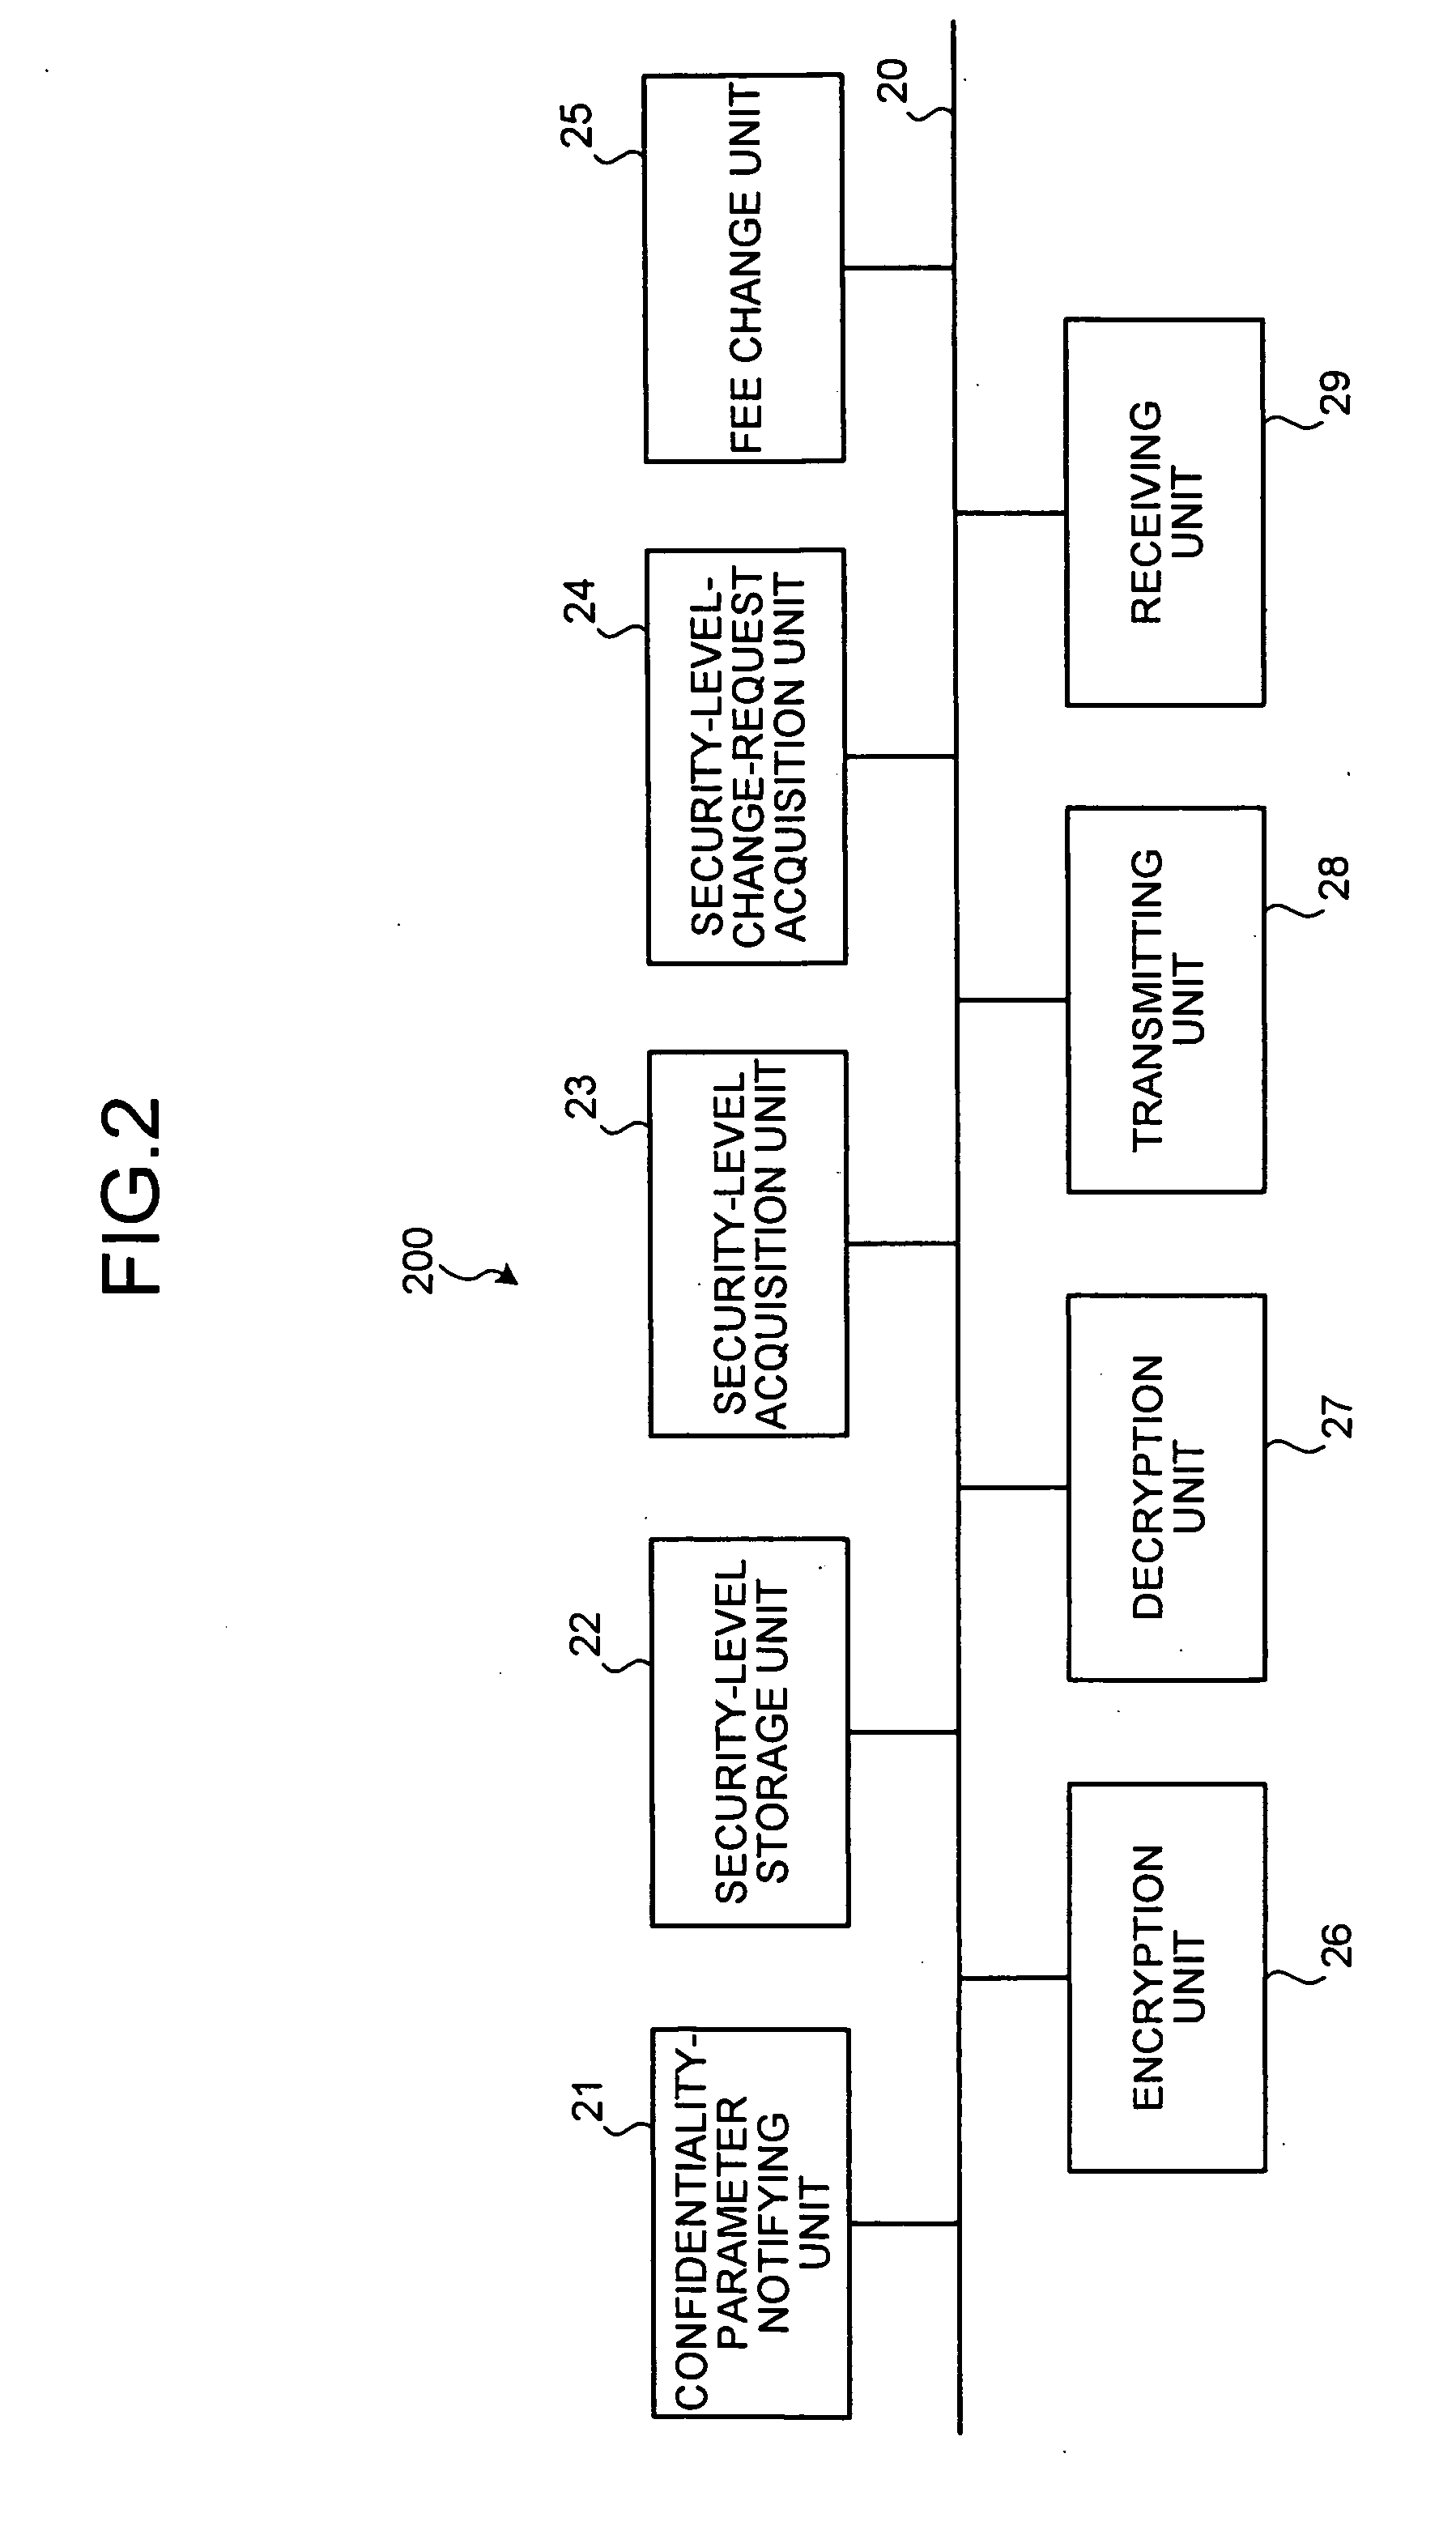 Communication network including mobile radio equipment and radio control system